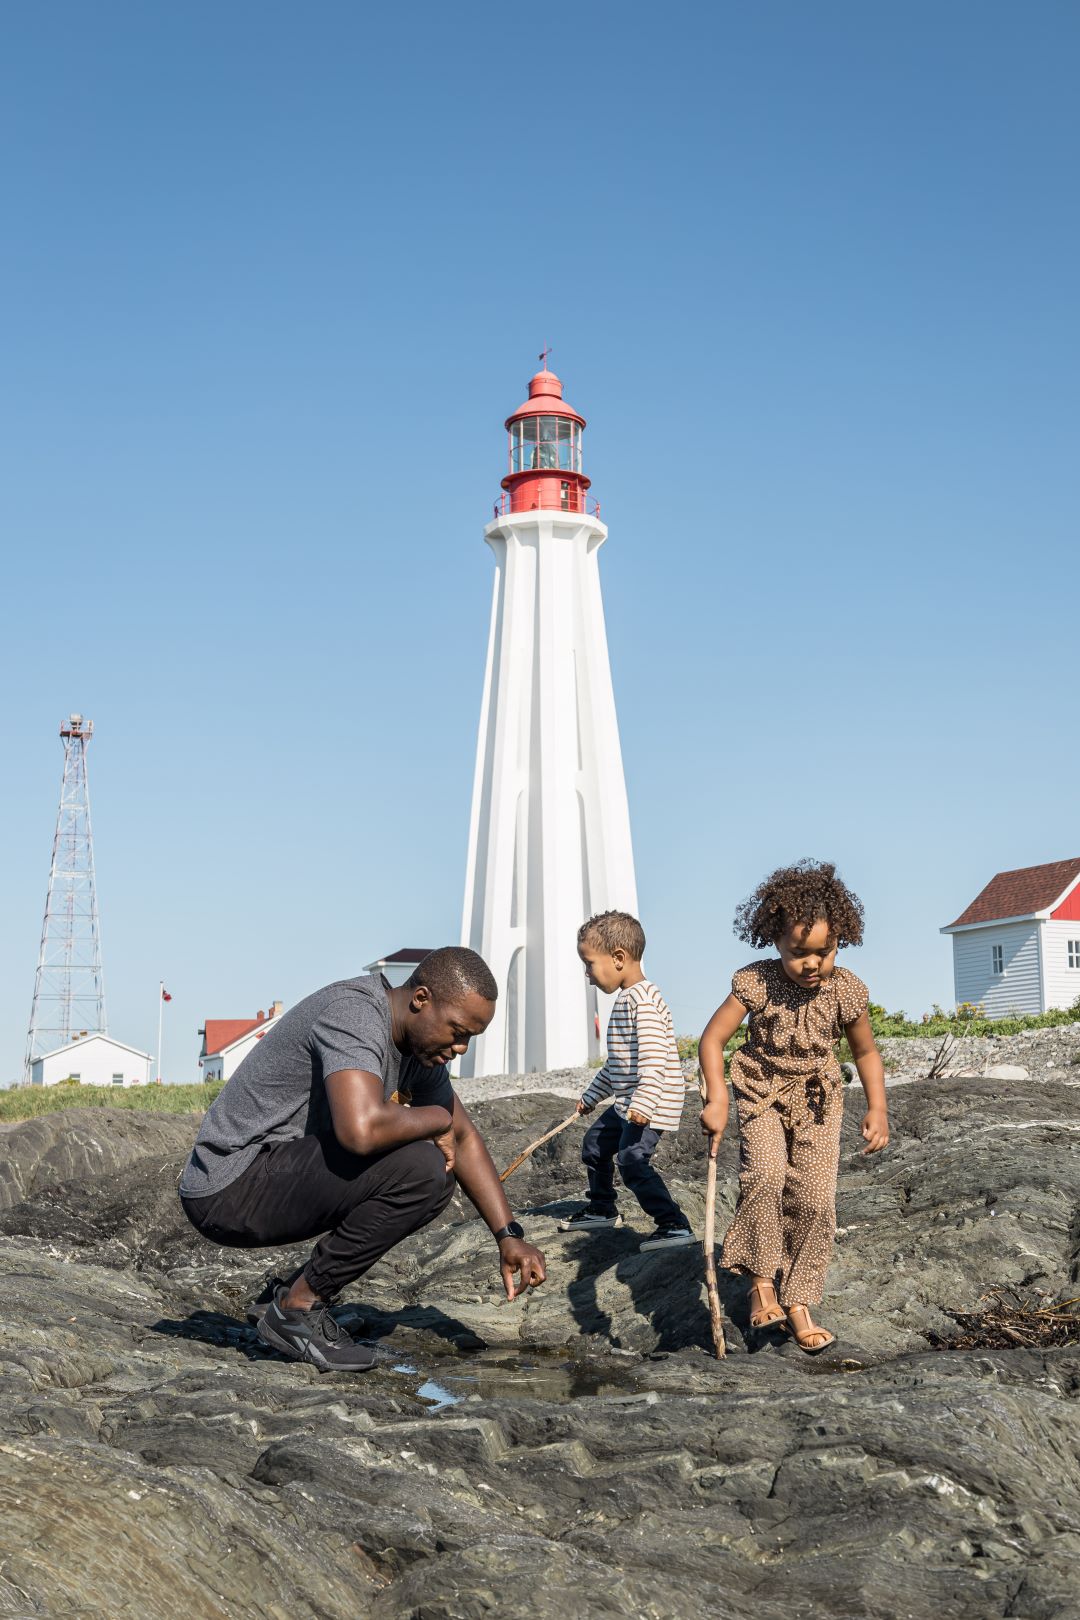 A family plays on the shore with a lighthouse in the back.